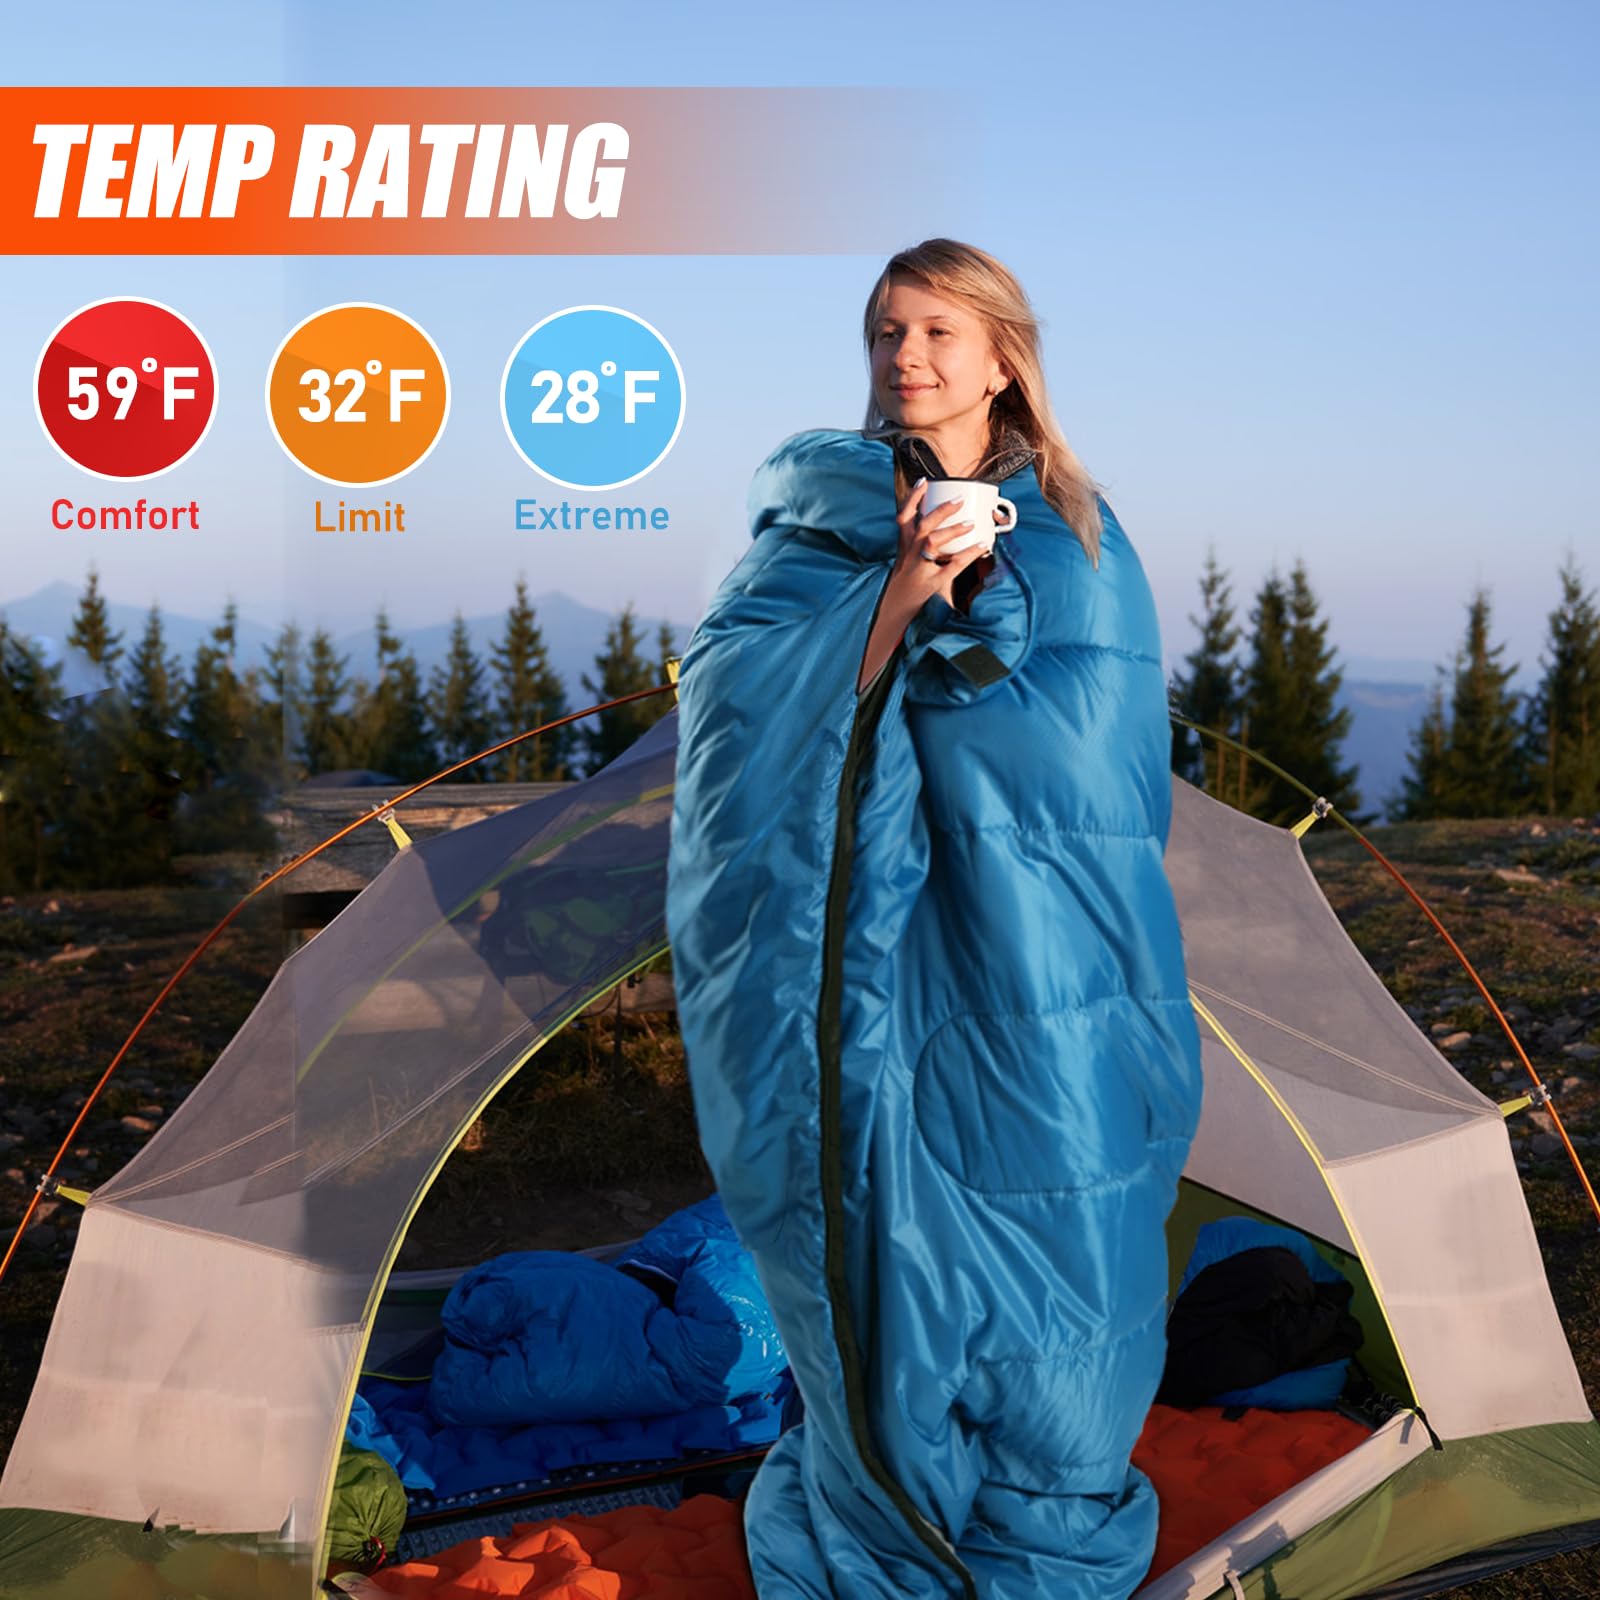 Sleep Bag Camping Sleeping Bag,3 Season Warm & Cool Weather, Summer,  Spring, Fall, Lightweight,for Adult & Kid, Portable And Waterproof Outdoor  Camping Hiking Travel Sleeping Bags, Sports Equipment, Hiking & Camping on